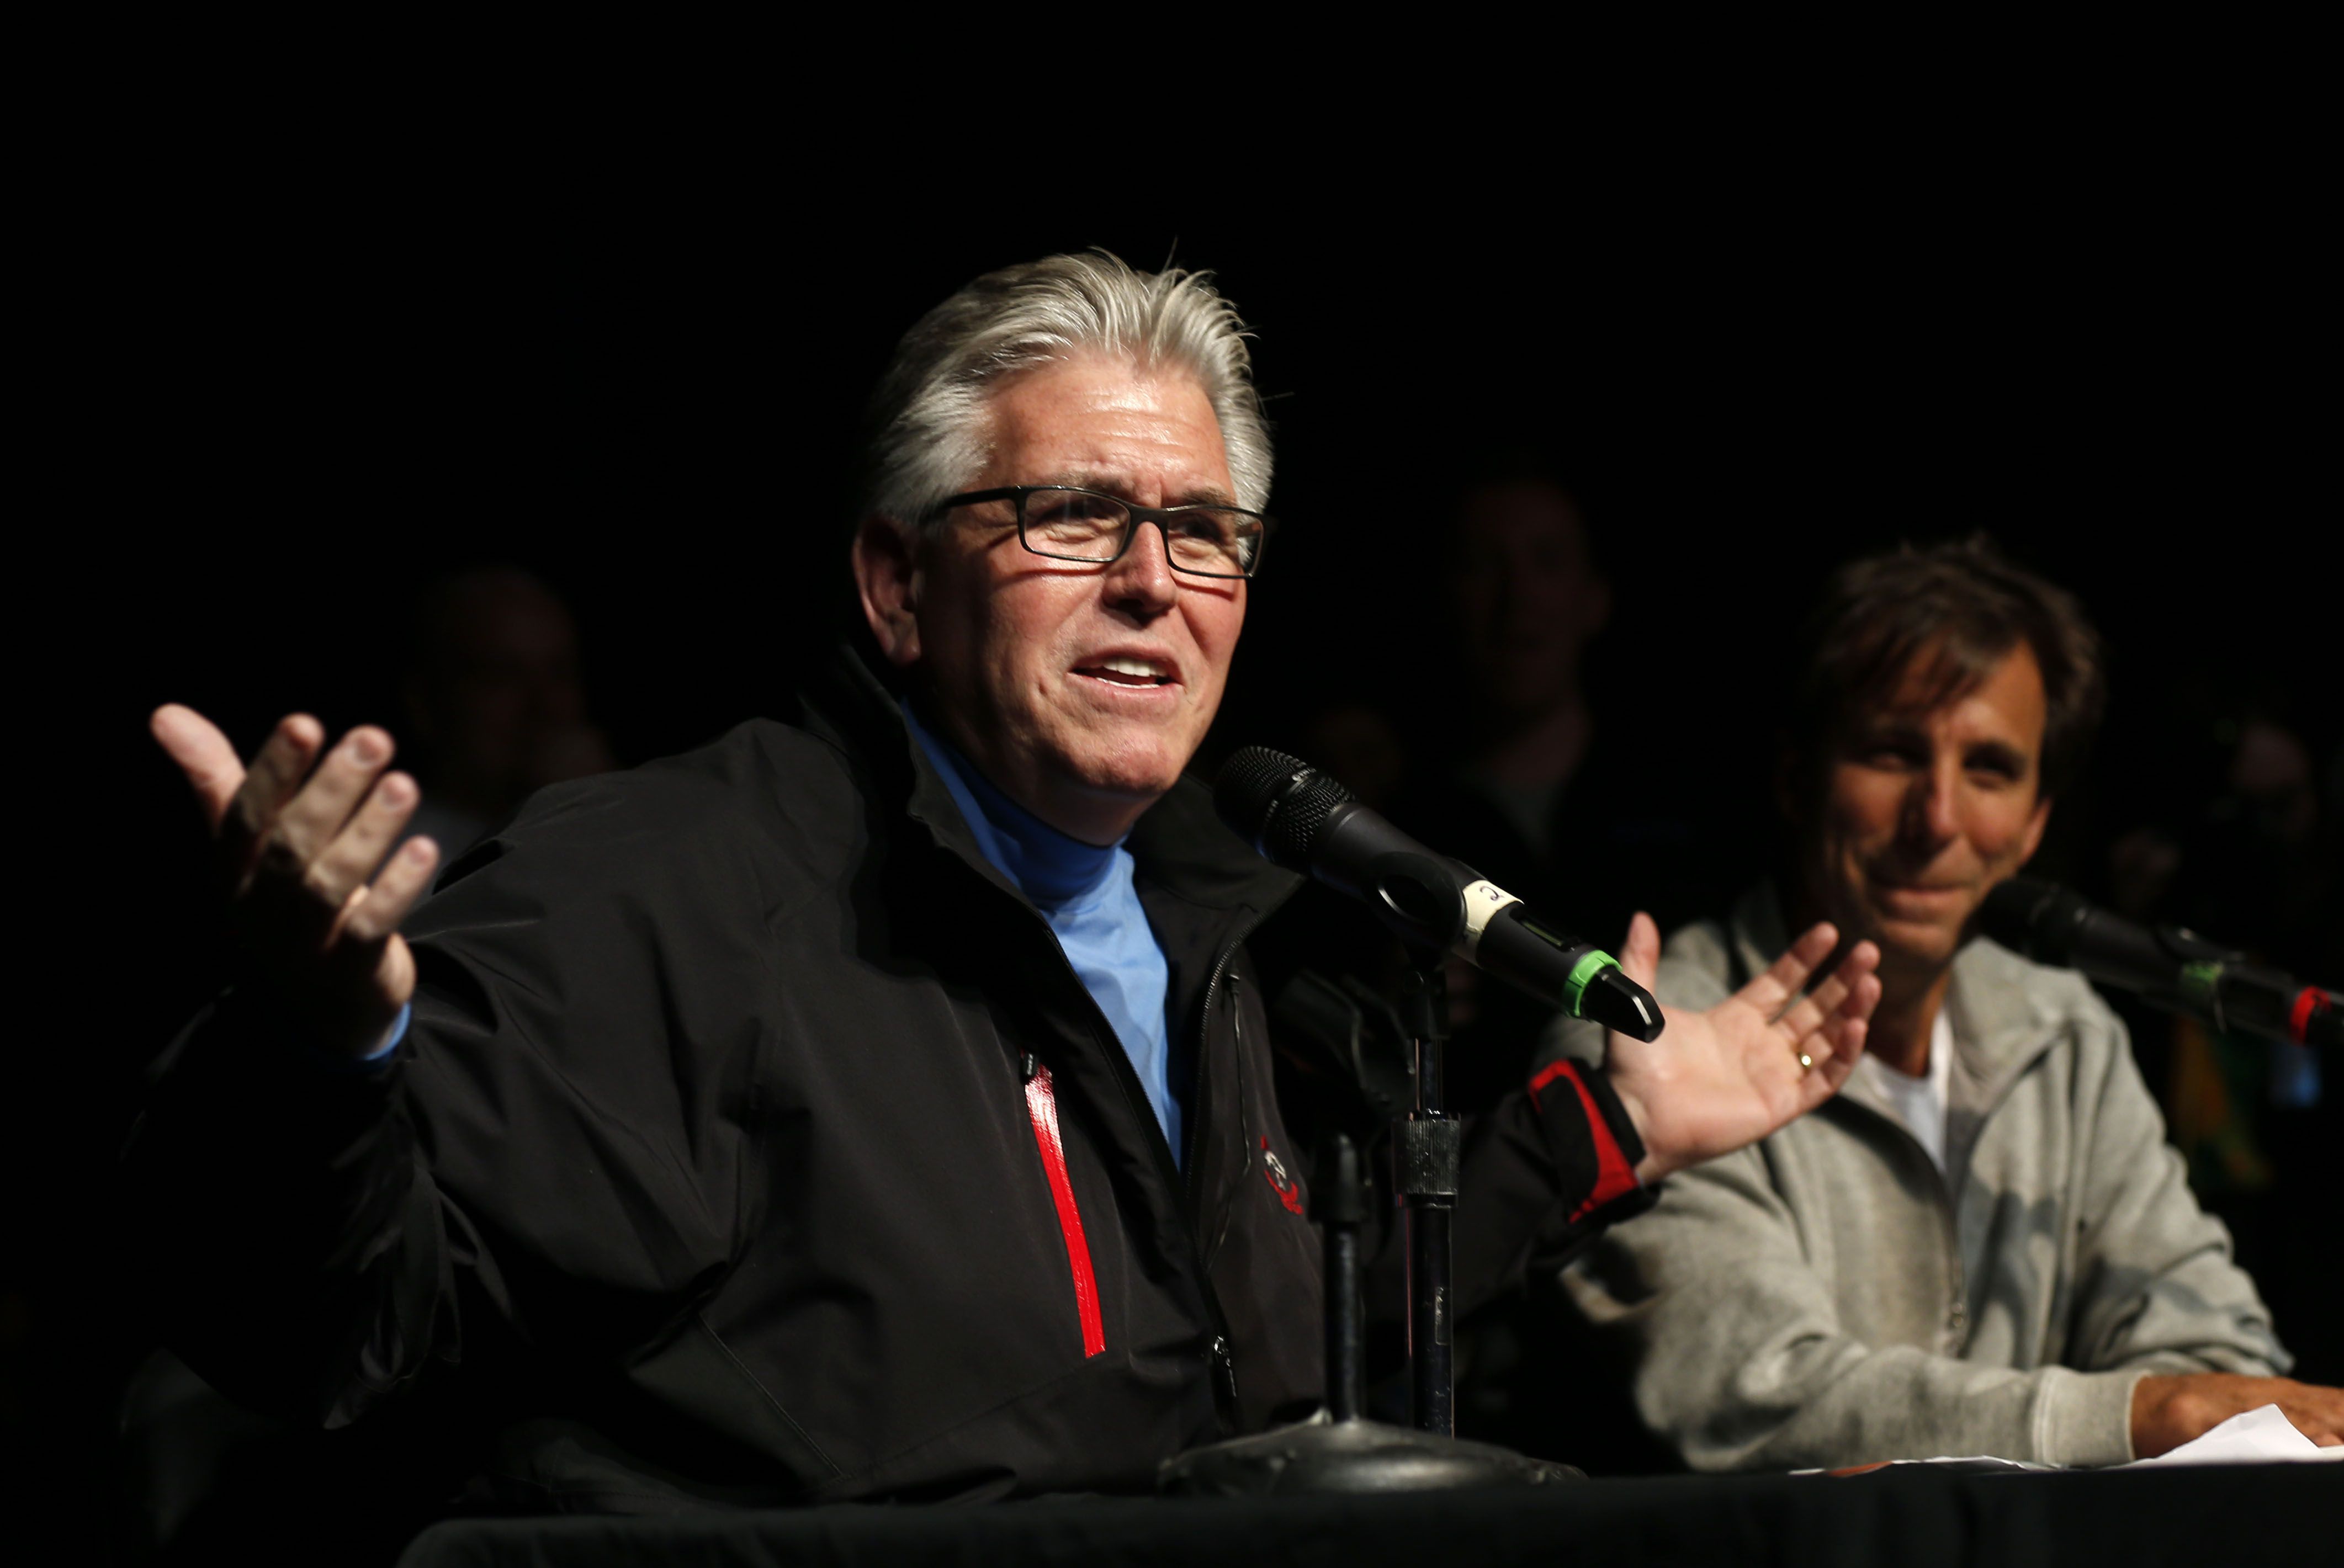 Boomer Esiason, Mike Francesa are showing off WFAN's worst